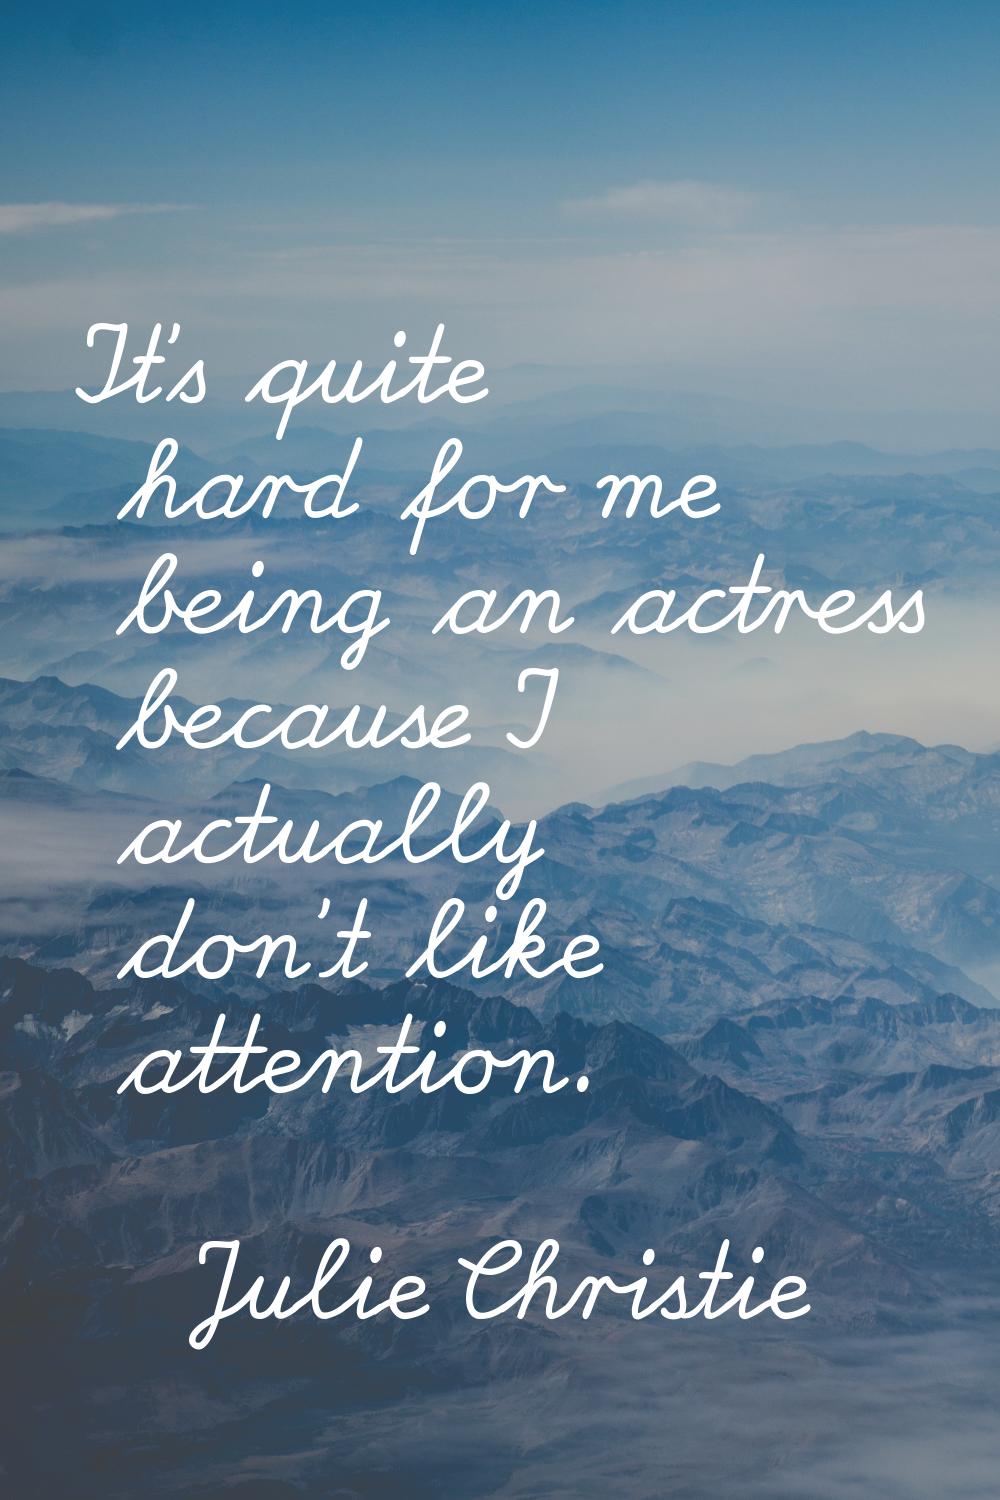 It's quite hard for me being an actress because I actually don't like attention.